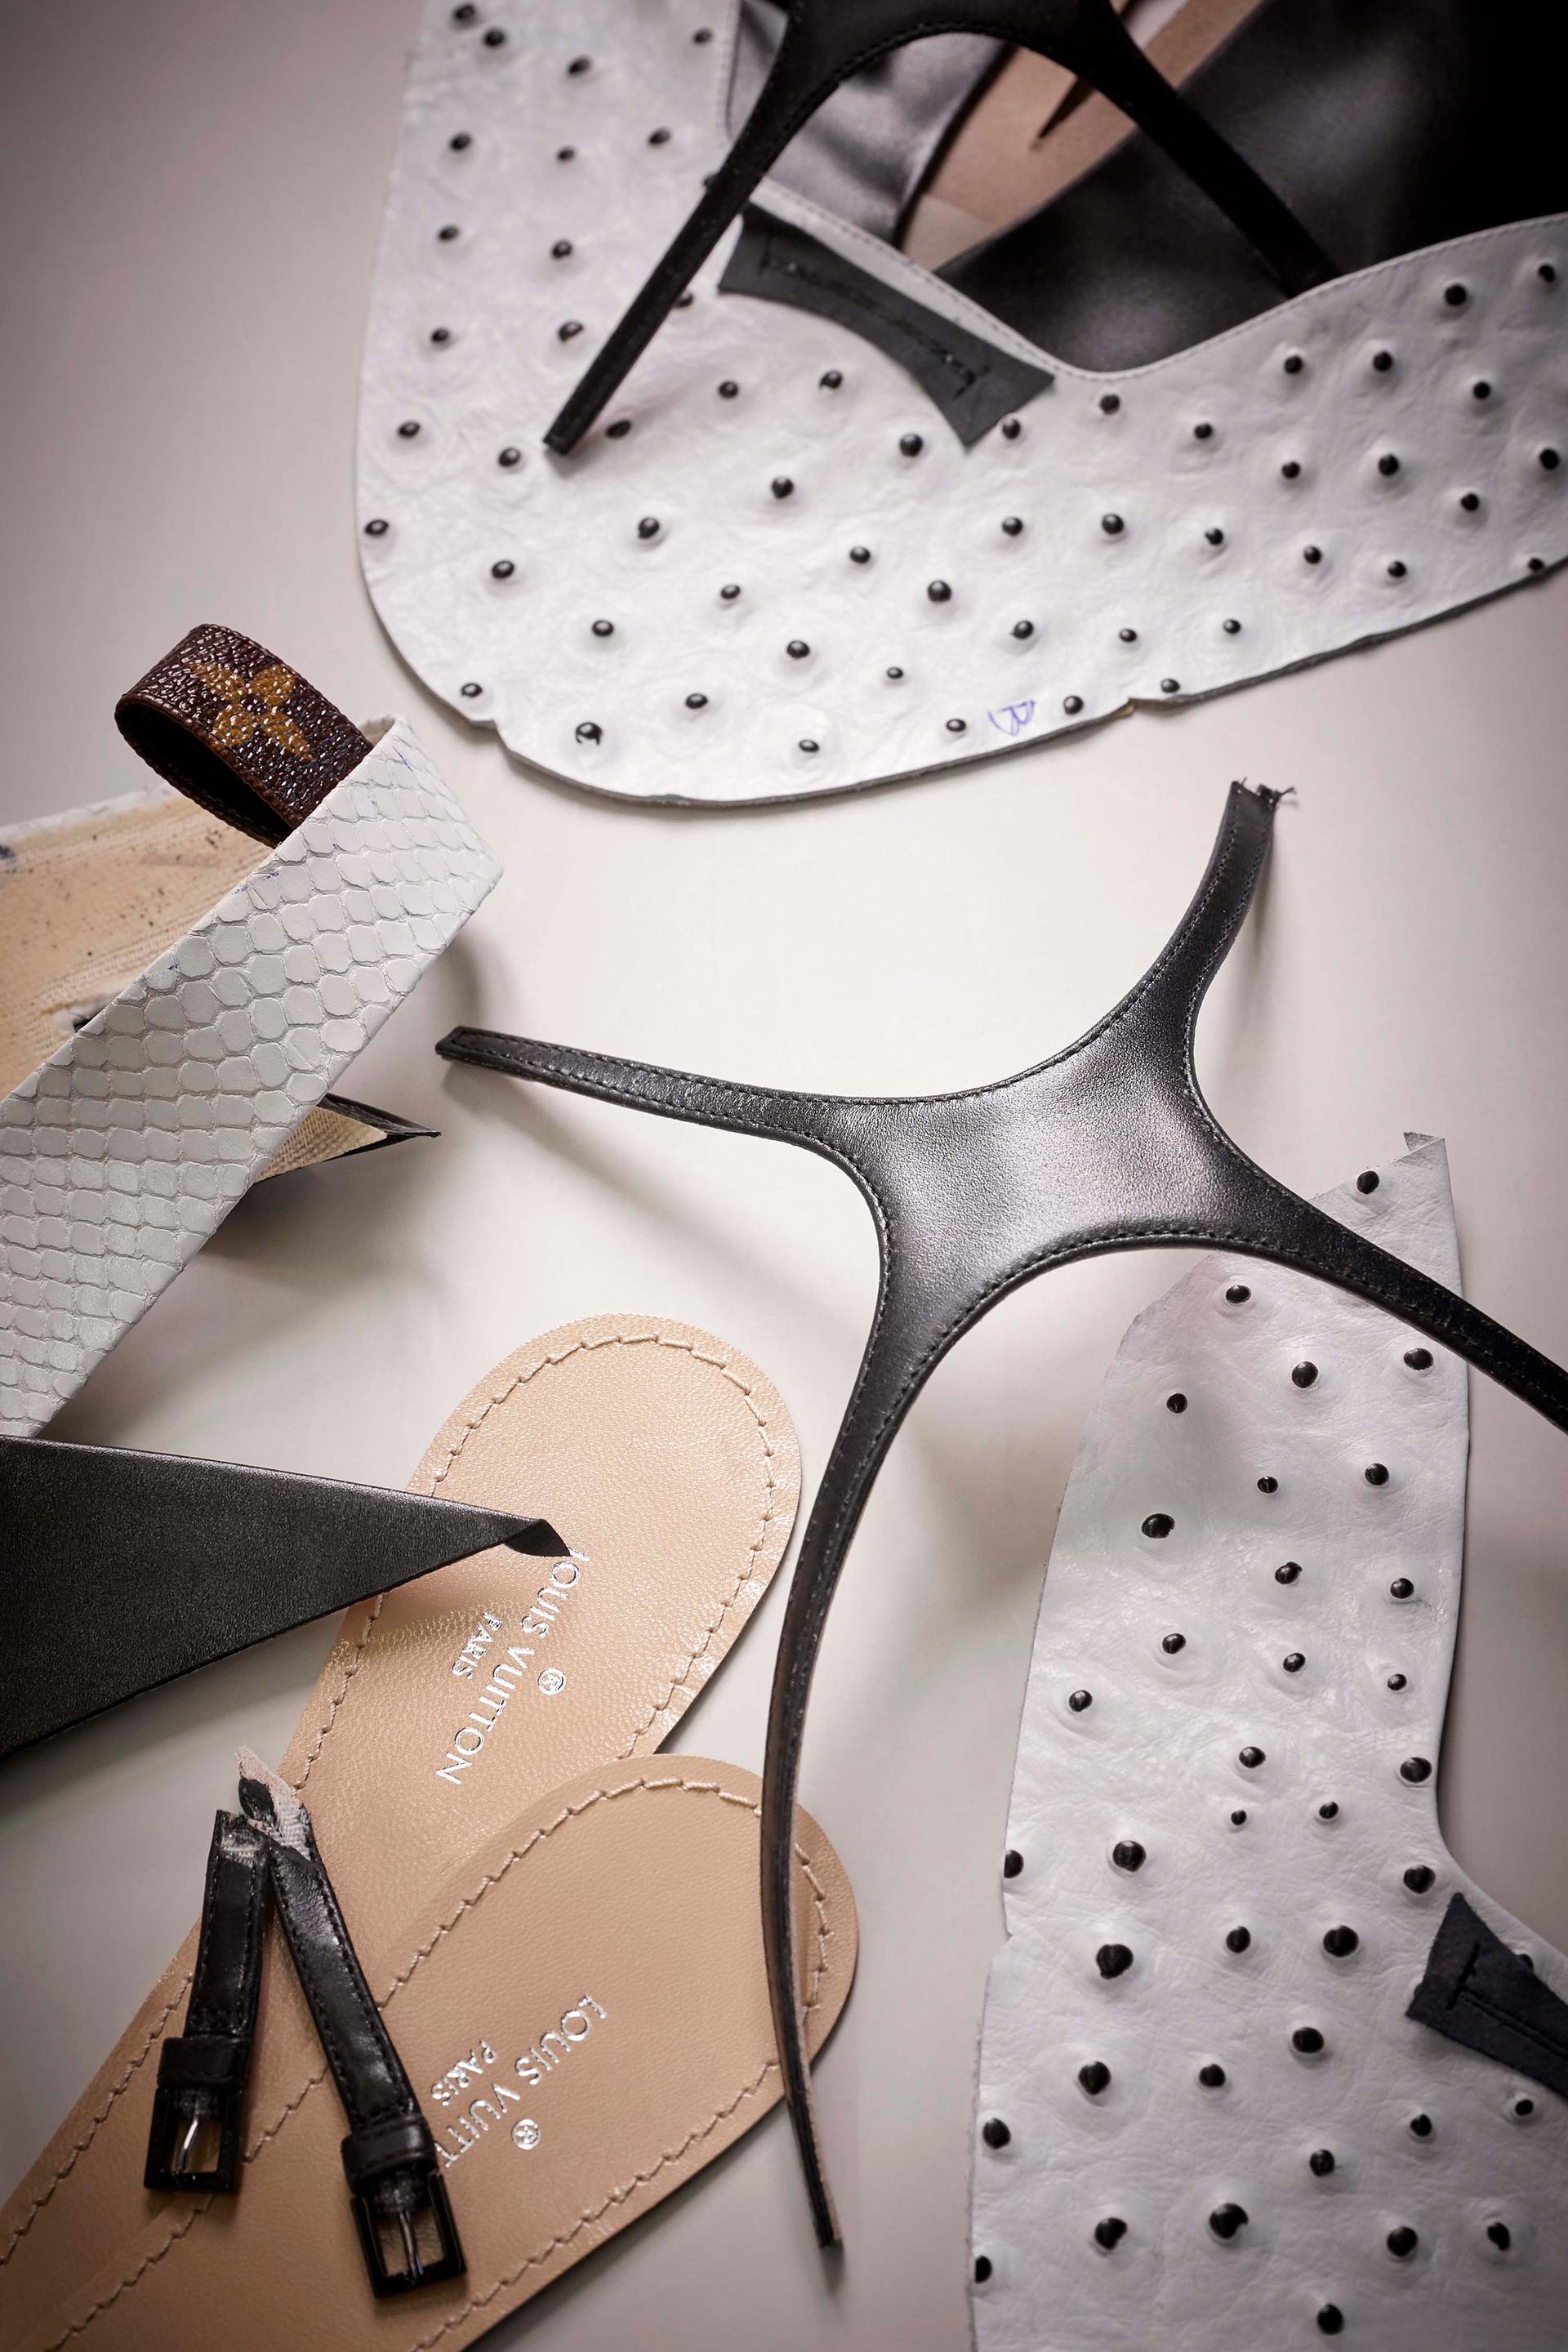 At Louis Vuitton's Footwear Atelier in Italy, an Extreme